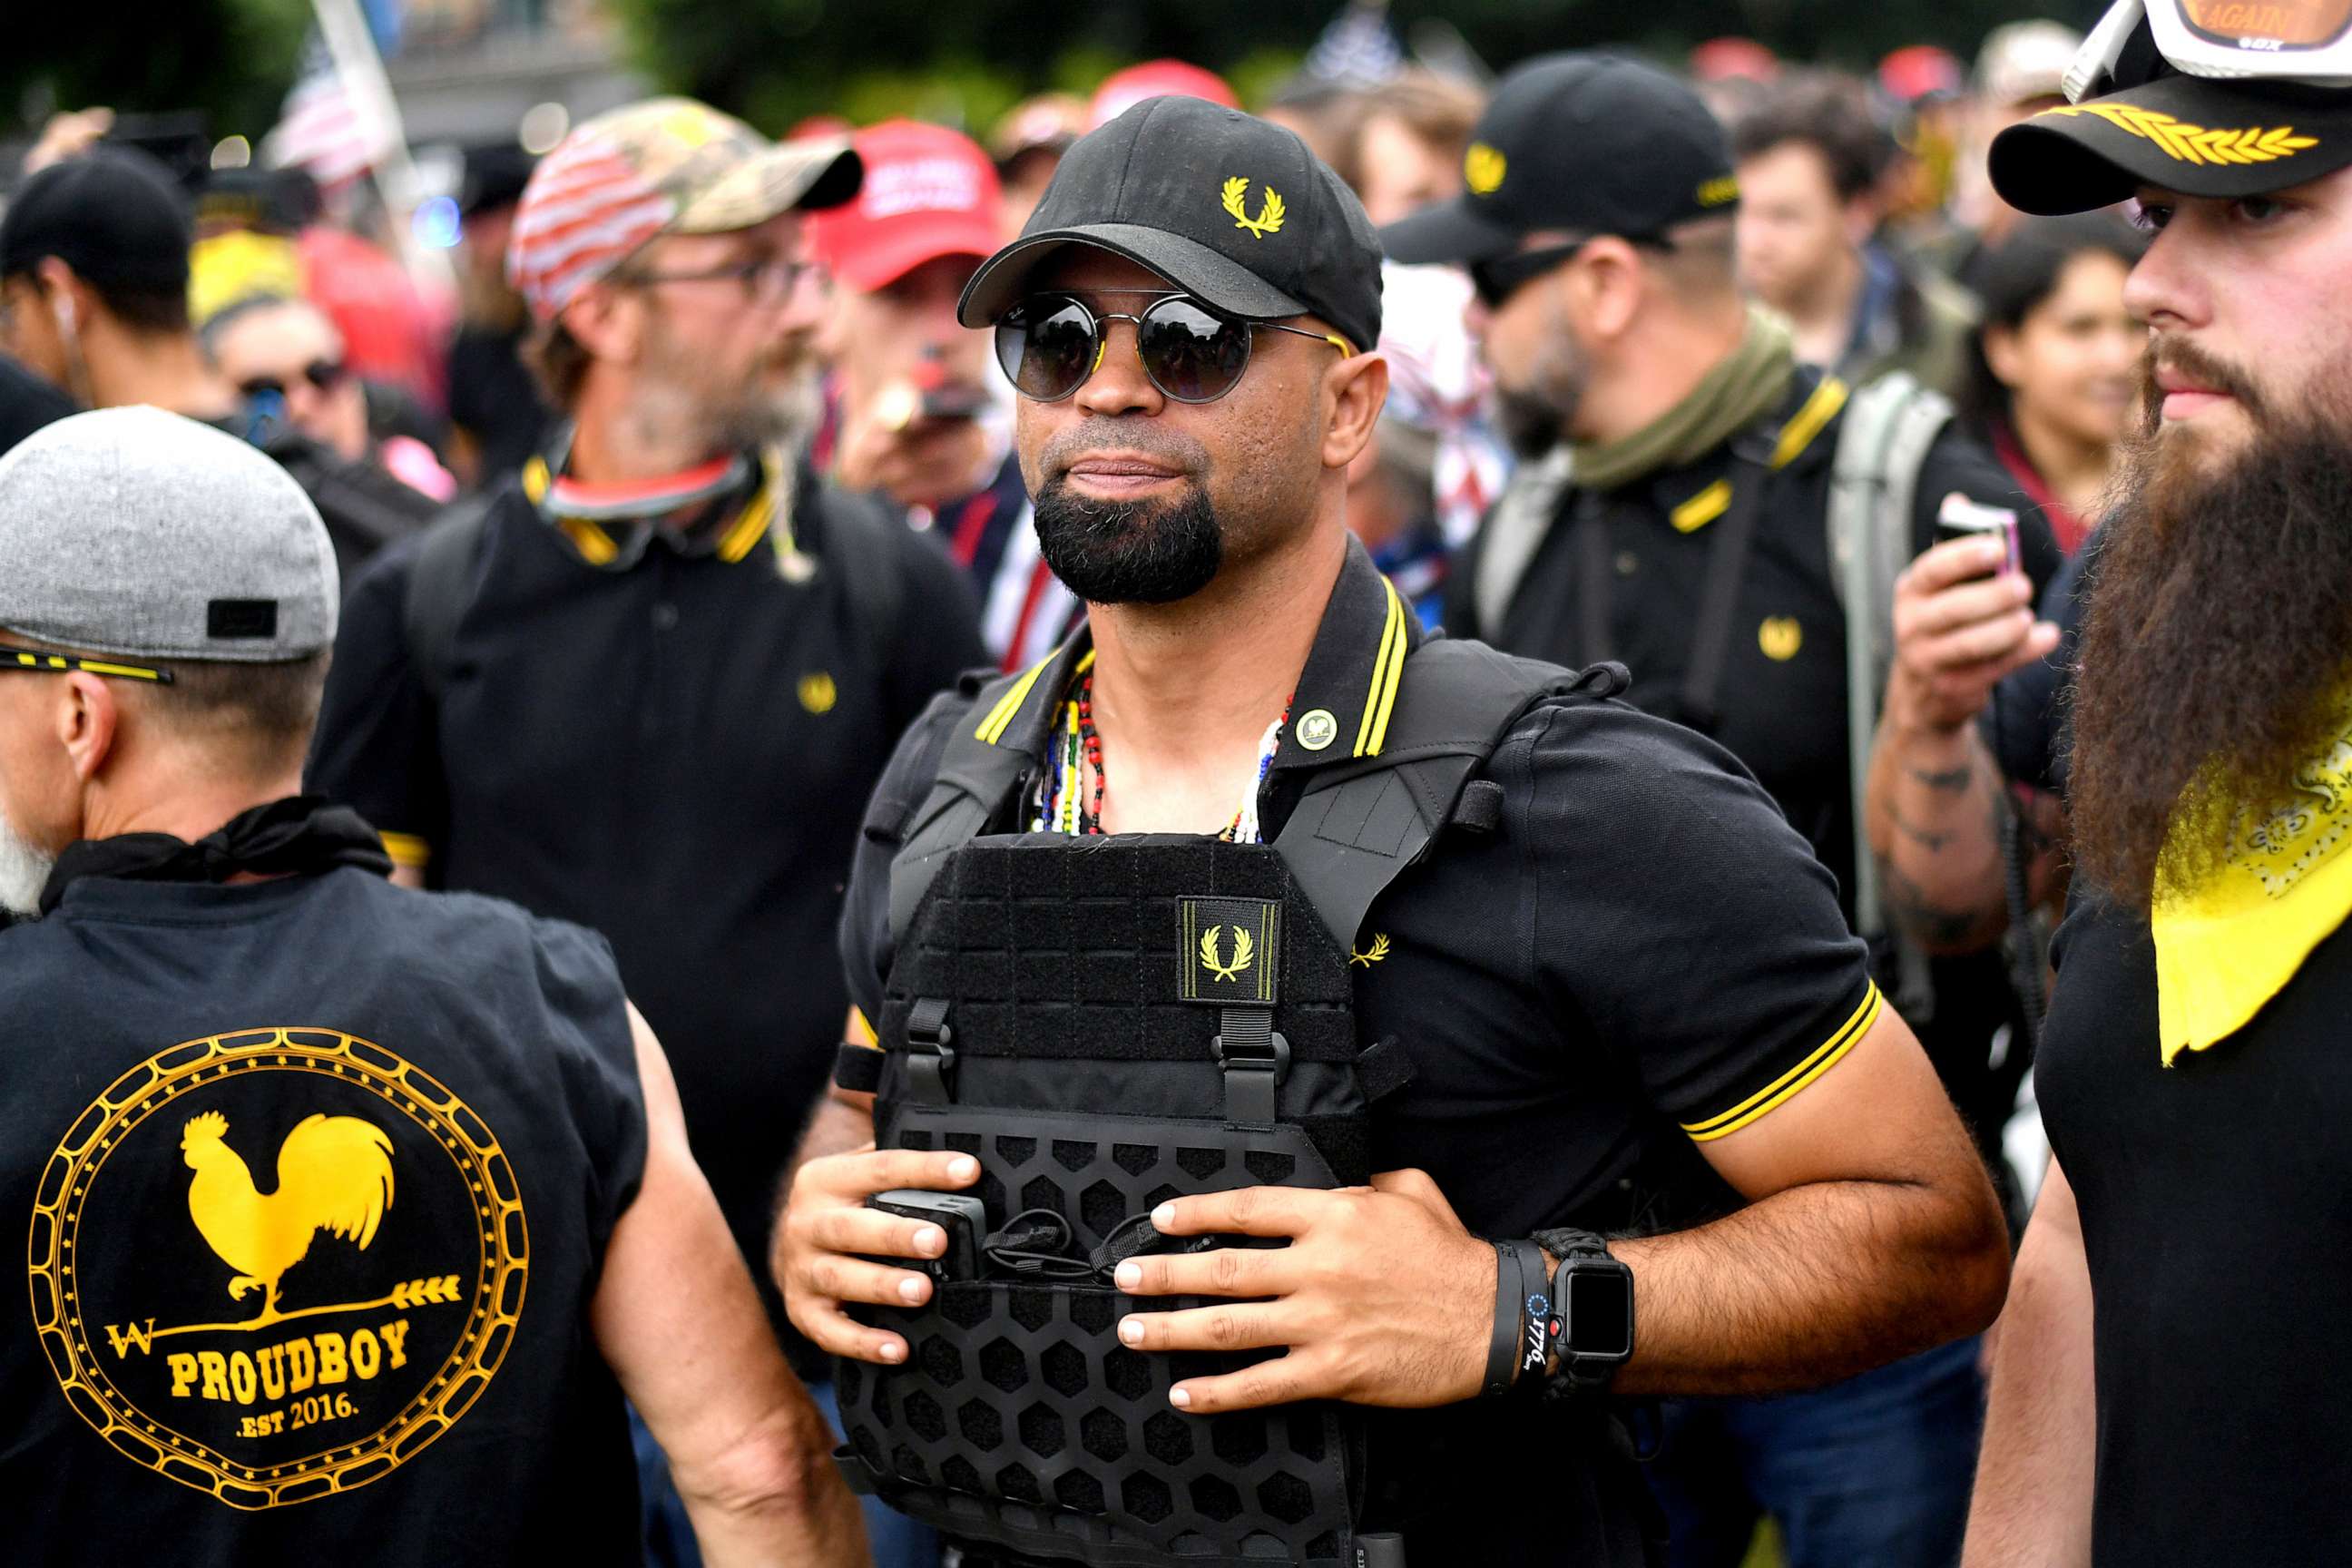 PHOTO: Enrique Tarrio and members of the Proud Boys attend a rally in Portland, Ore., Aug. 17, 2019.